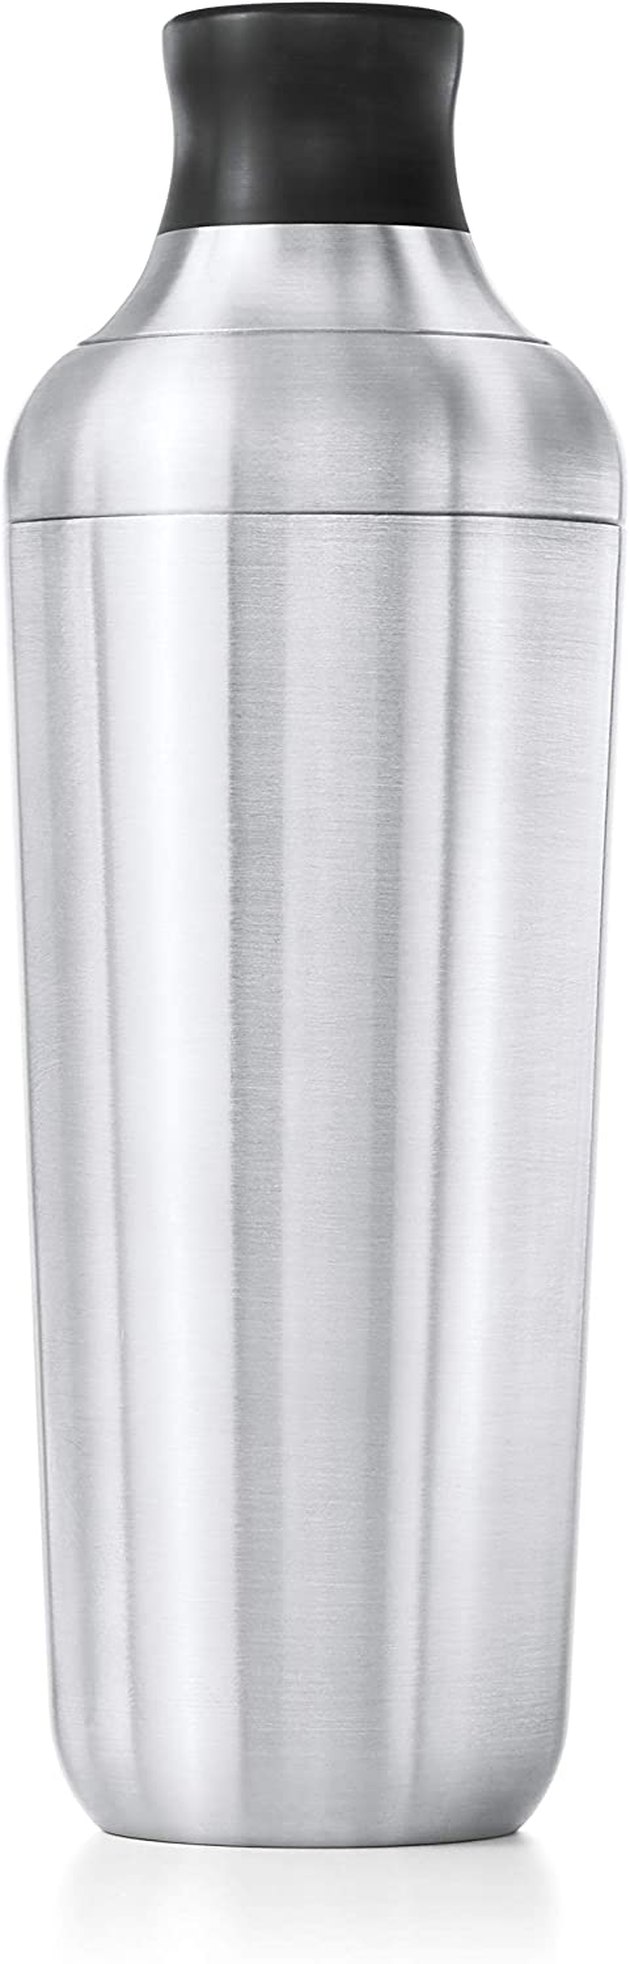 This stainless steal cocktail shaker has a brushed finish and cap that doubles as a jigger with printed measurements. The two silicone gaskets create a leak-proof seal, so you'll never fear the beverage getting anywhere other than your glass.